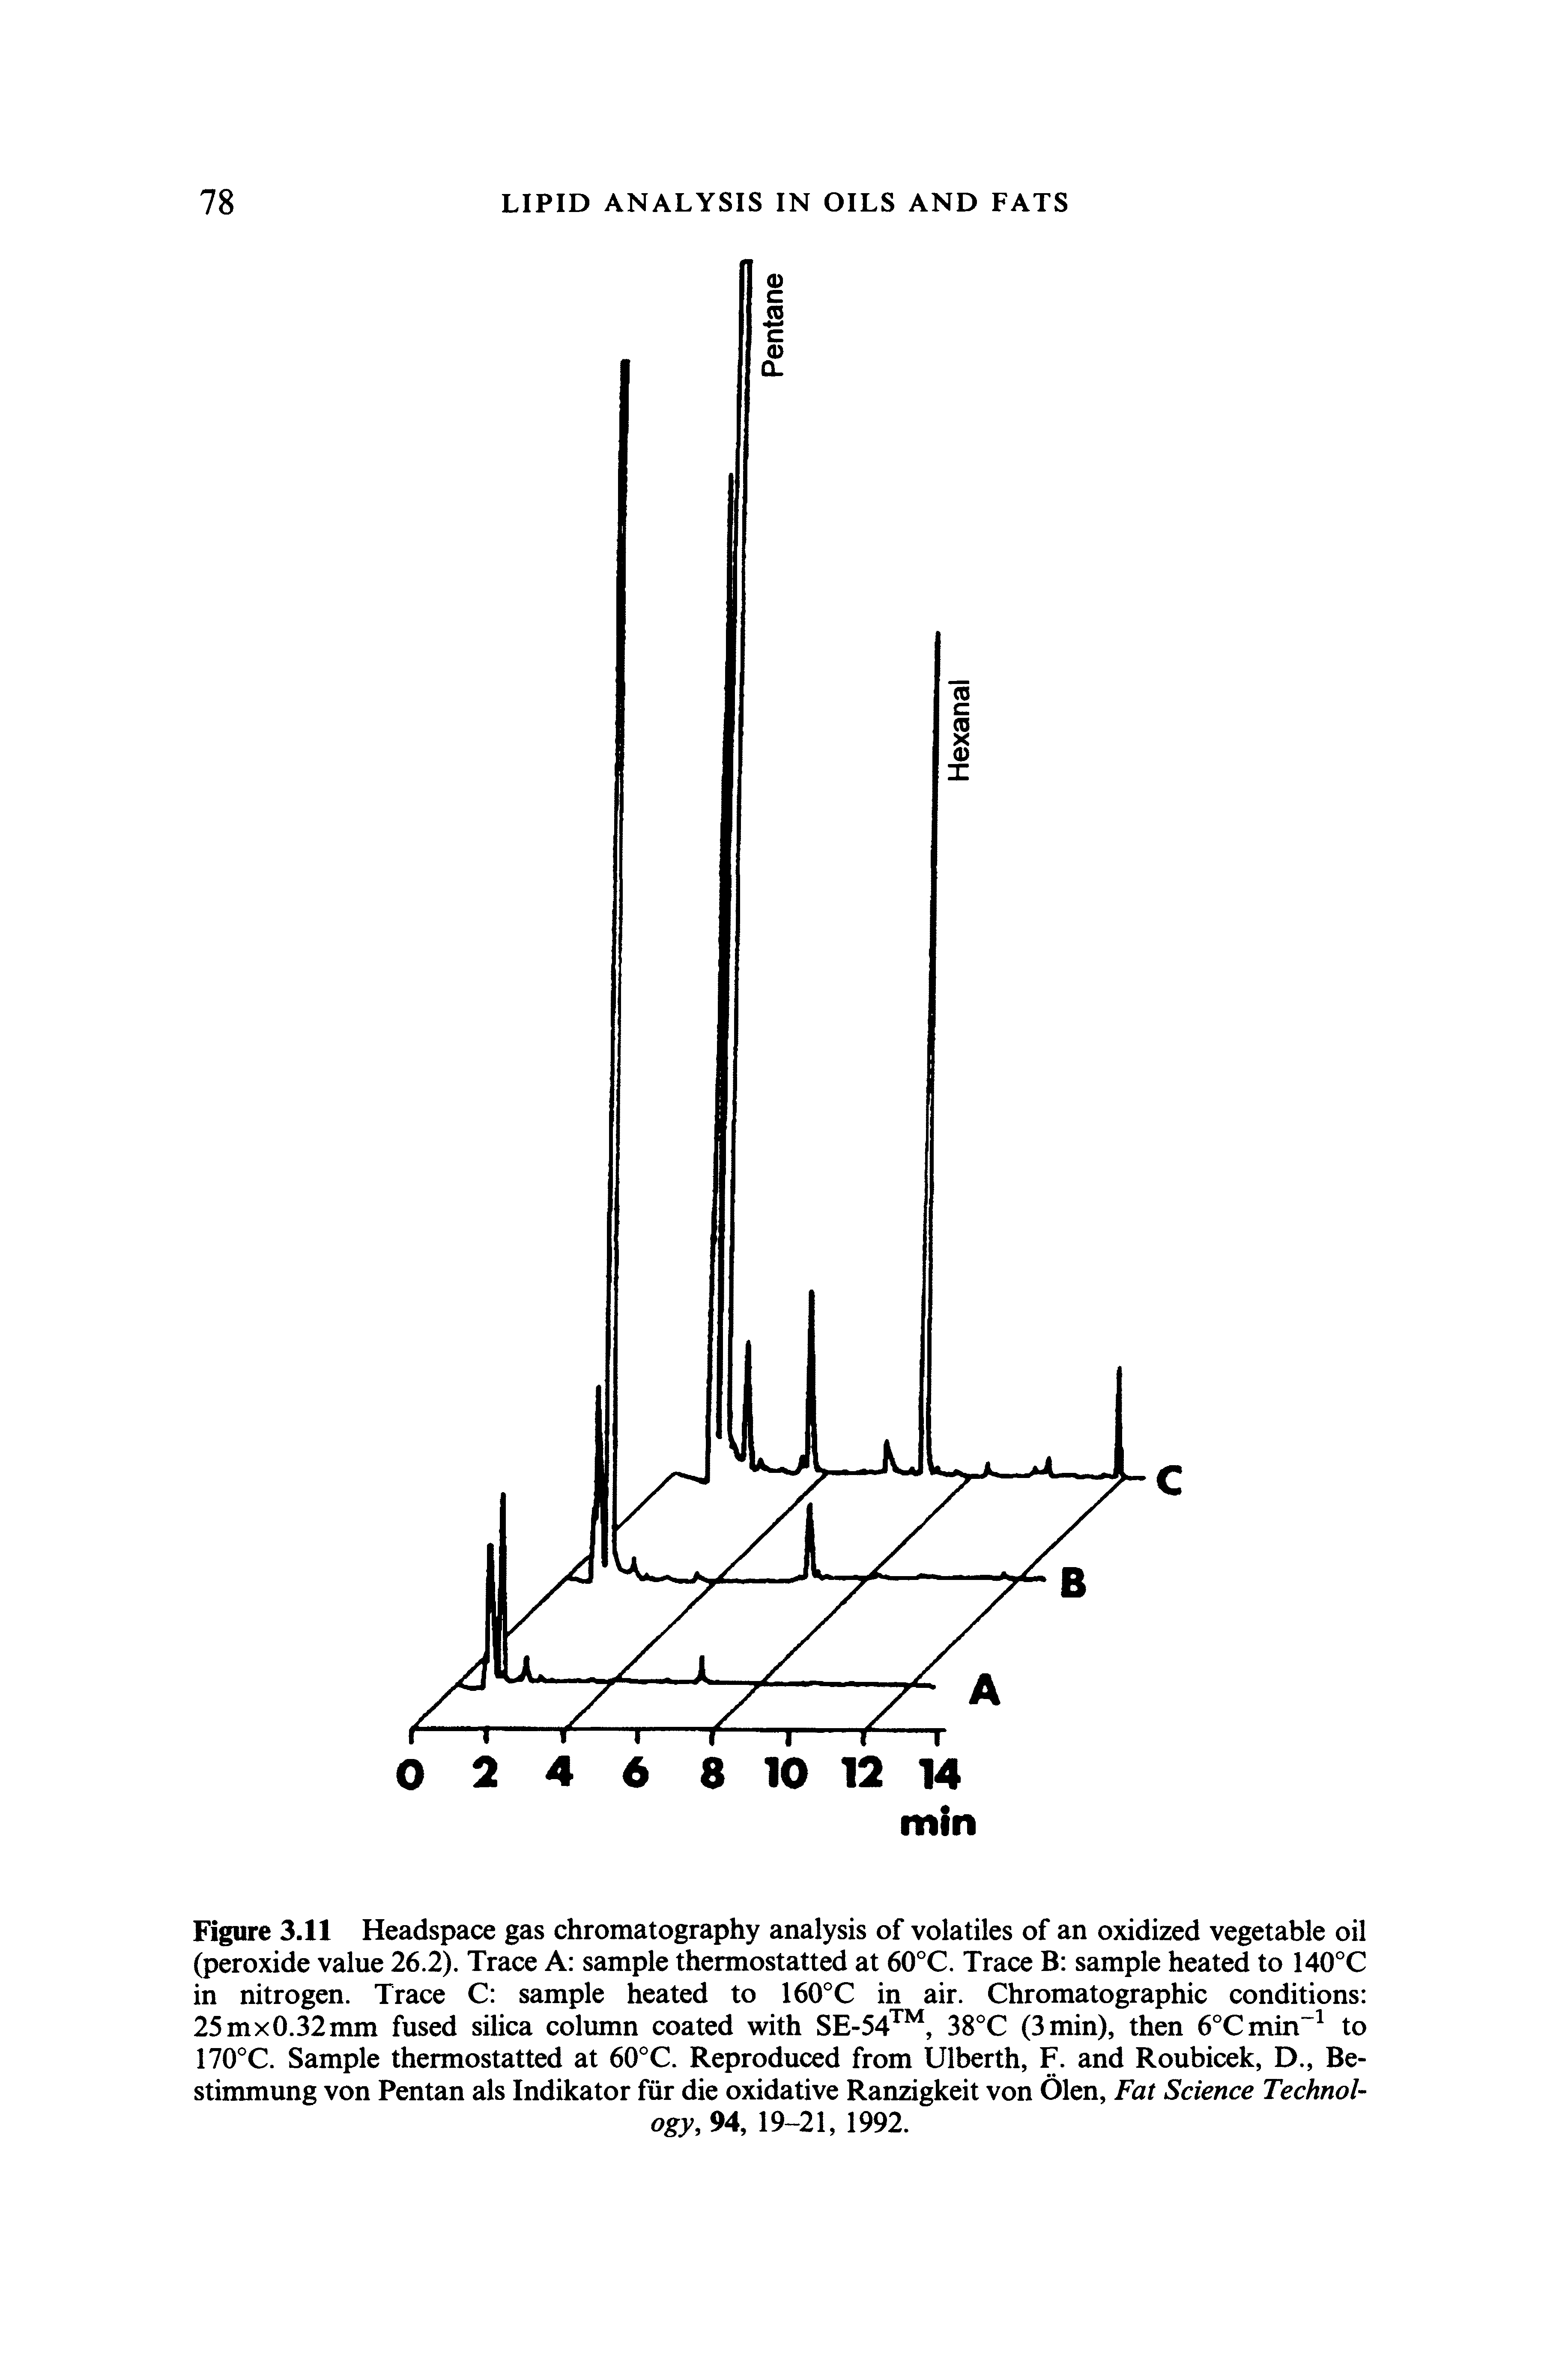 Figure 3.11 Headspace gas chromatography analysis of volatiles of an oxidized vegetable oil (peroxide value 26.2). Trace A sample thermostatted at 60°C. Trace B sample heated to 140°C in nitrogen. Trace C sample heated to 160°C in air. Chromatographic conditions 25 mx0.32mm fused silica column coated with SE-54 , 38°C (3 min), then 6°Cmin to 170°C. Sample thermostatted at 60°C. Reproduced from Ulberth, F. and Roubicek, D., Be-stimmung von Pentan als Indikator fur die oxidative Ranzigkeit von Olen, Fat Science Technology, 94, 19-21, 1992.